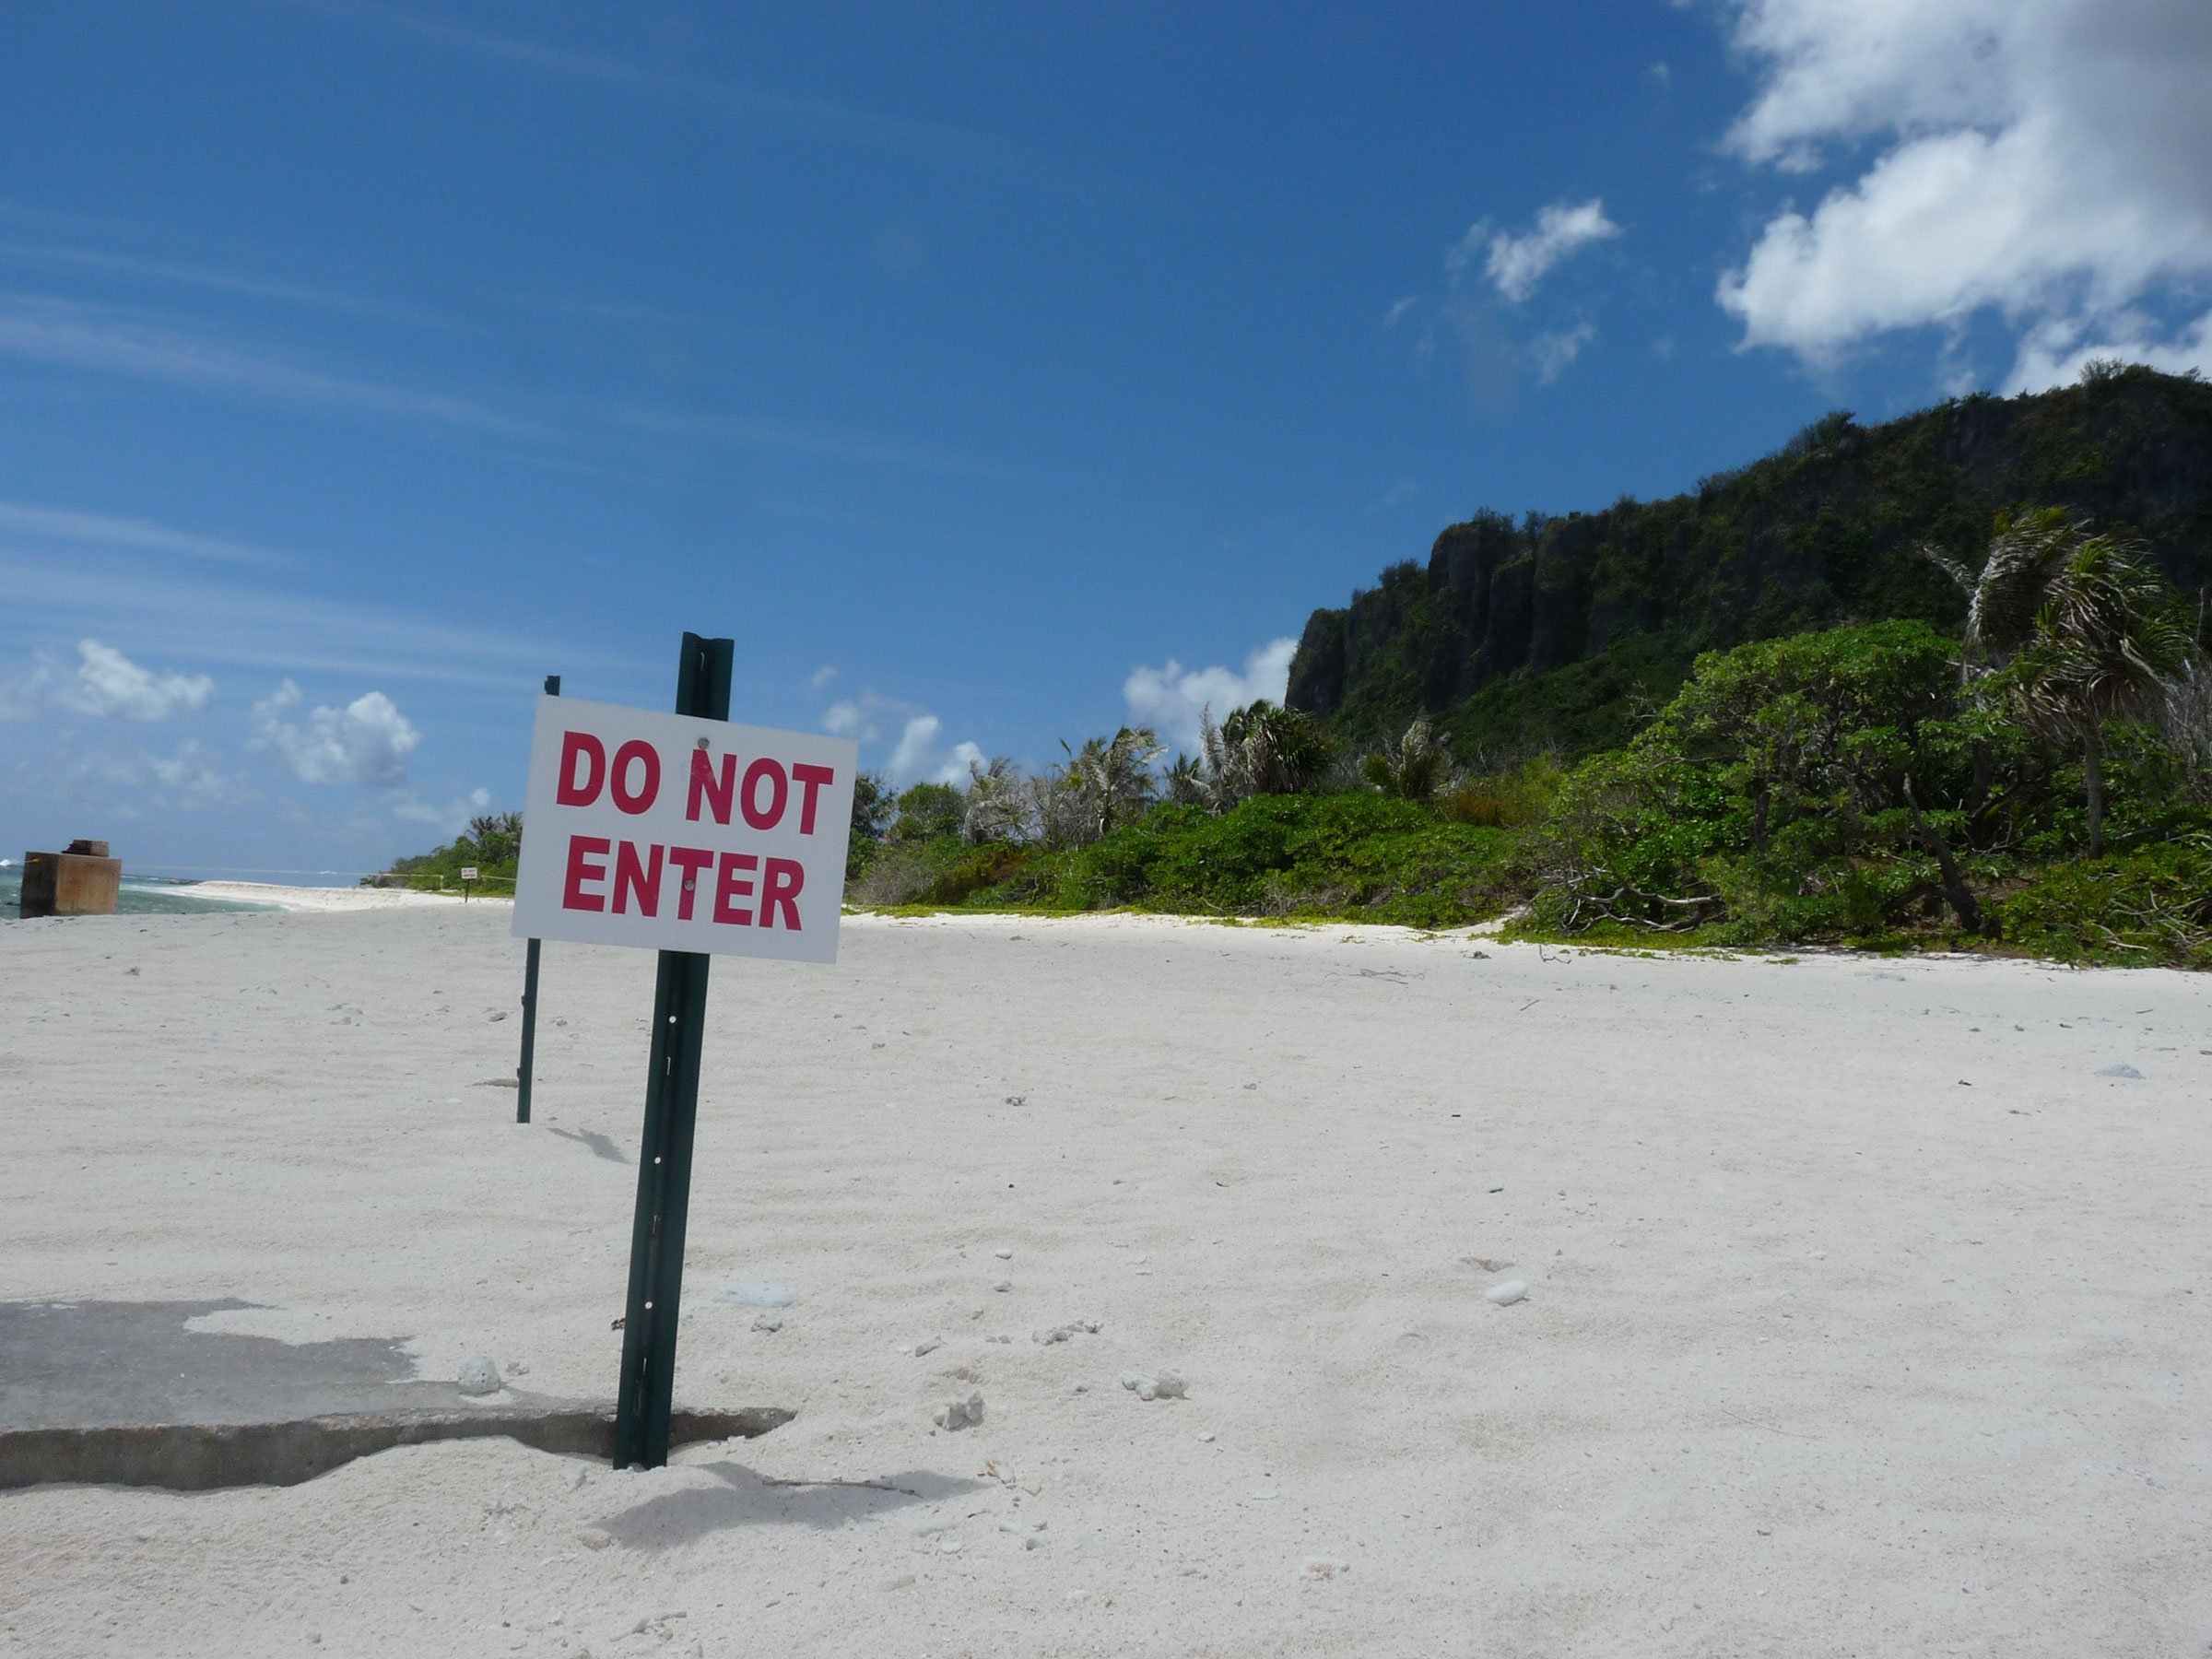 U.S. military installations restrict access to not only some of the best beaches on Guam, but also fragile ecosystems and culturally important sites.